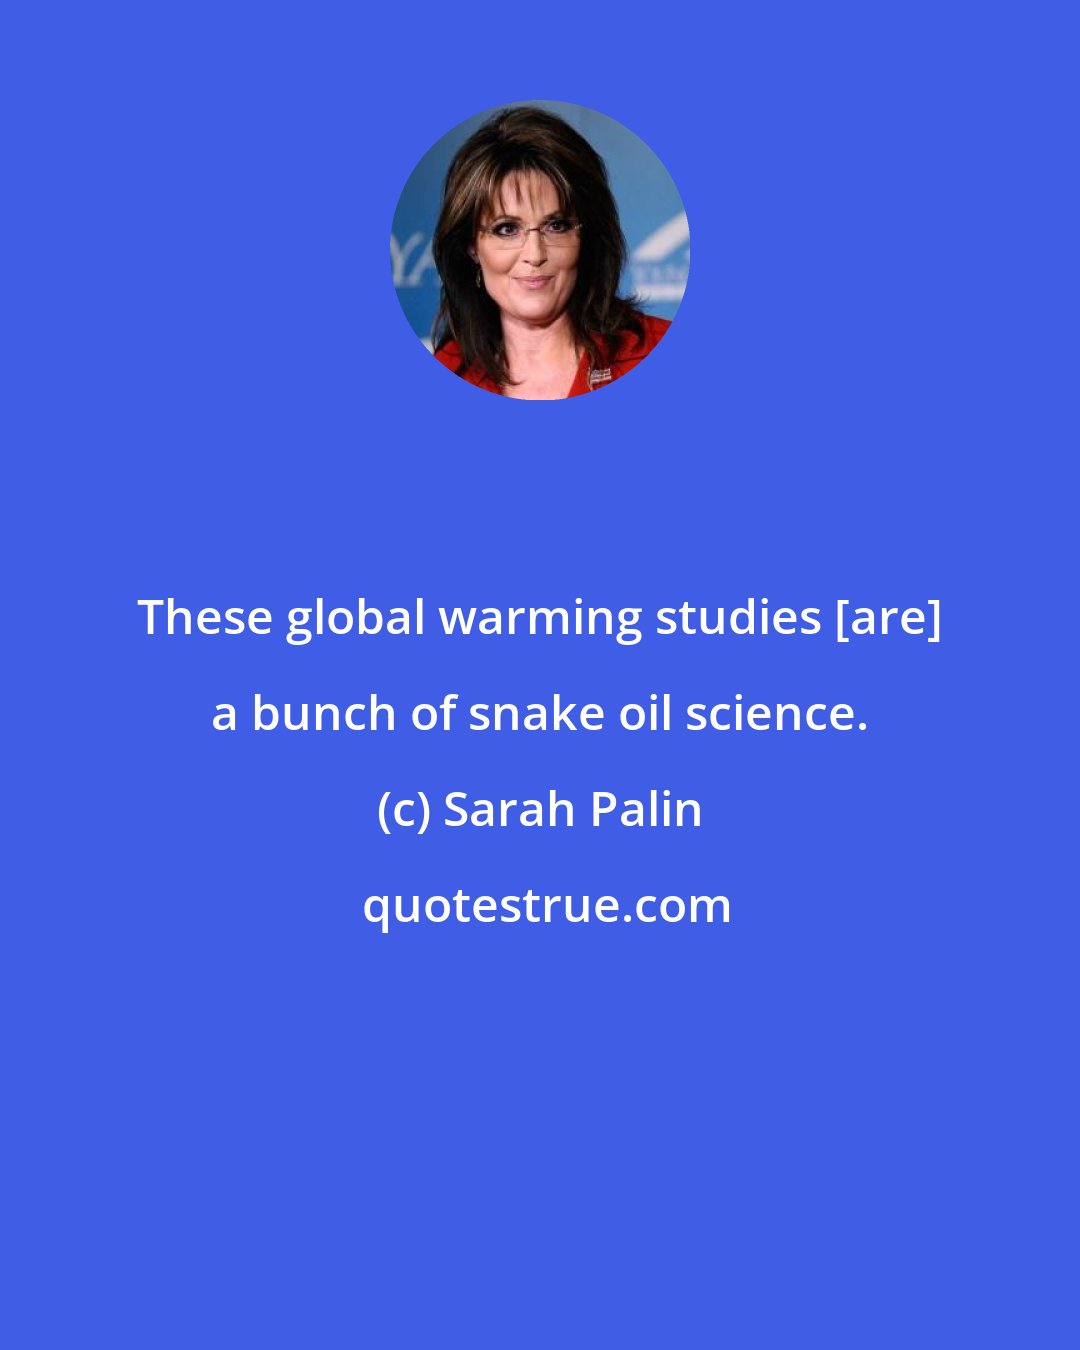 Sarah Palin: These global warming studies [are] a bunch of snake oil science.